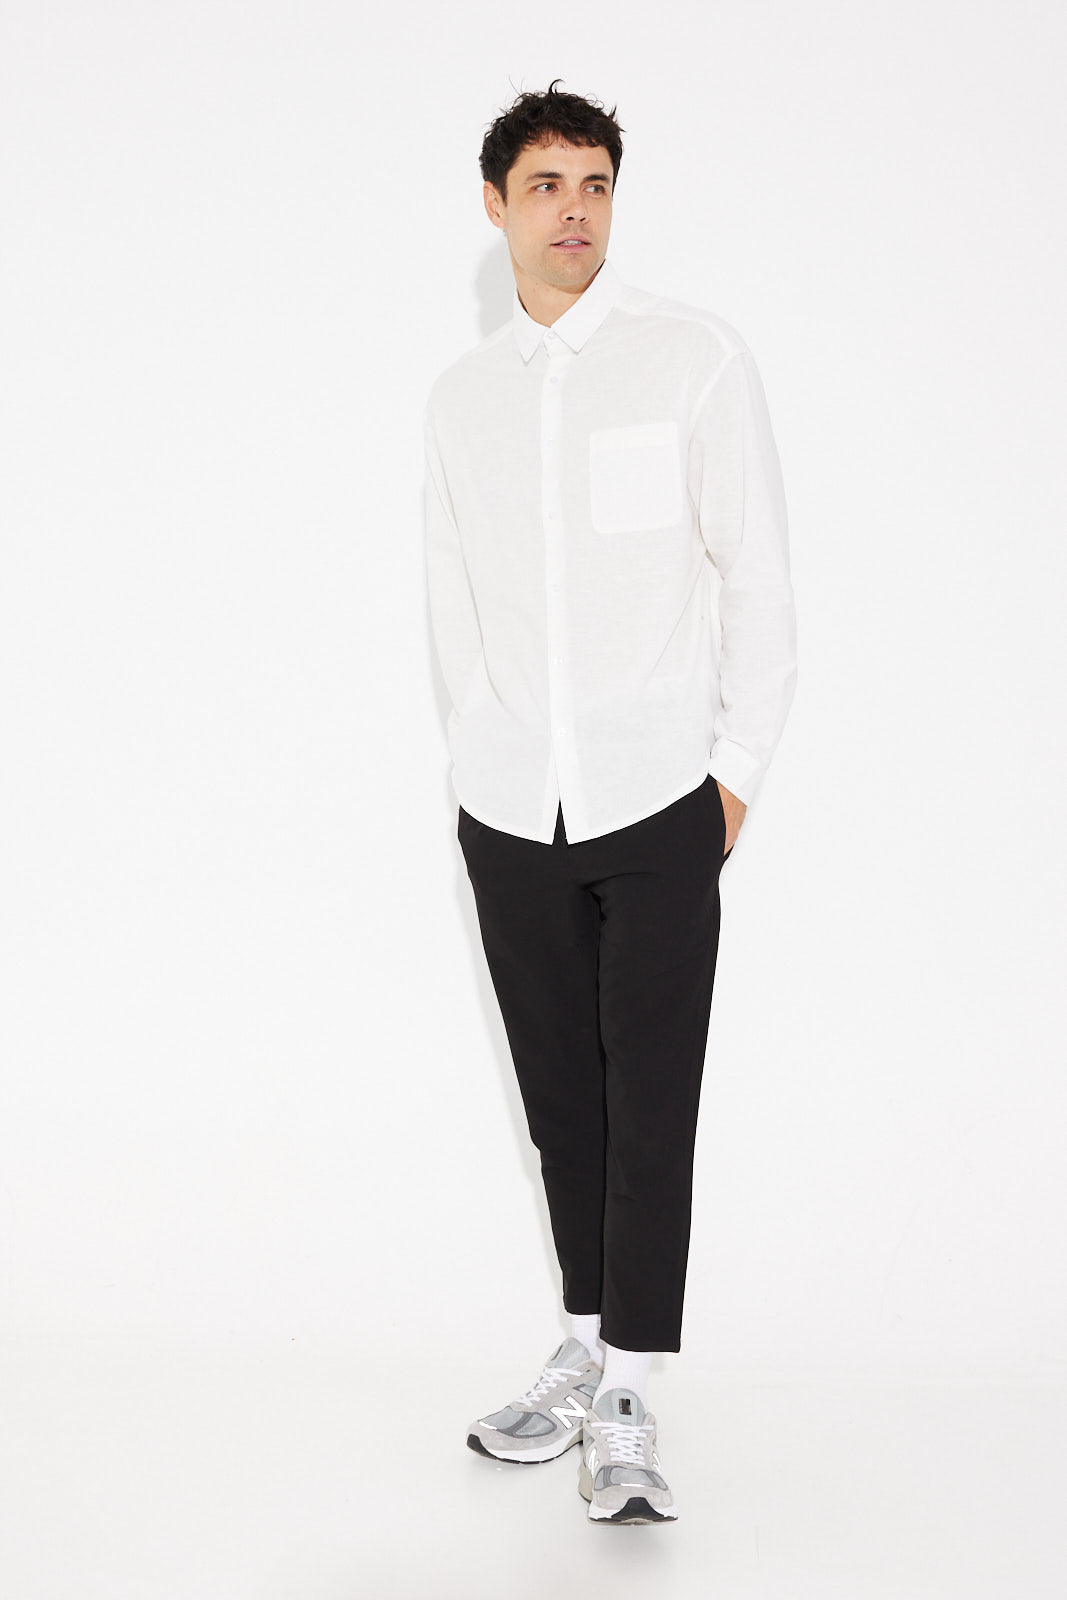 Mark Relaxed Shirt White - SALE